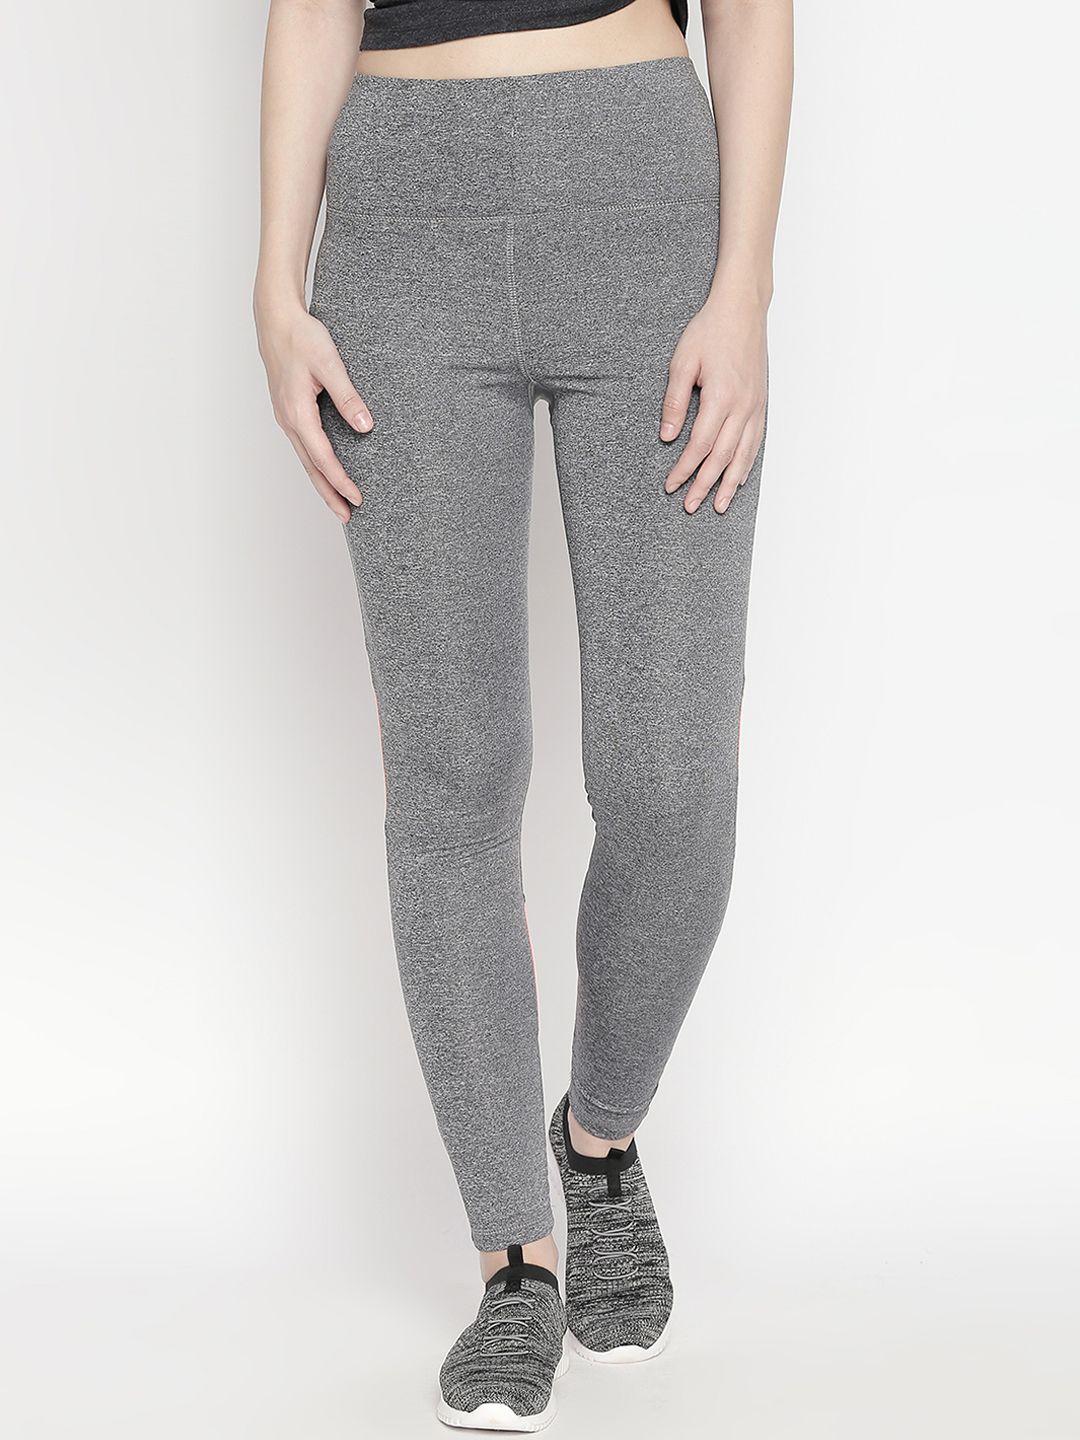 Agile Women Grey Solid Slim Fit Track Pants Price in India